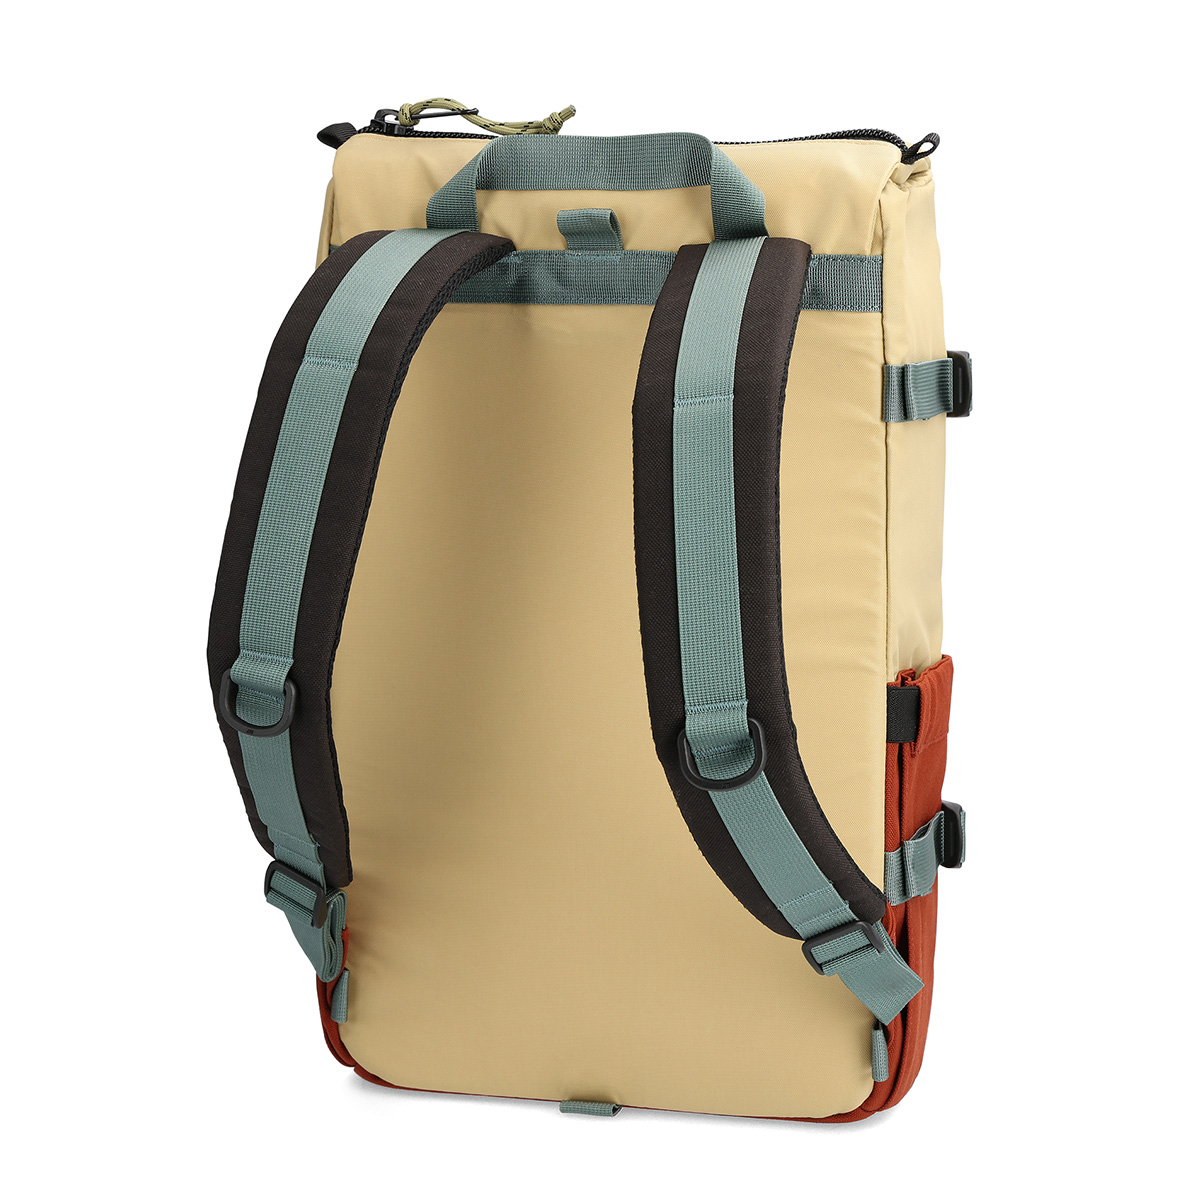 Topo Designs Rover Pack Classic Sahara/Fire Brick, durable, lightweight and water-resistant pack for daily use